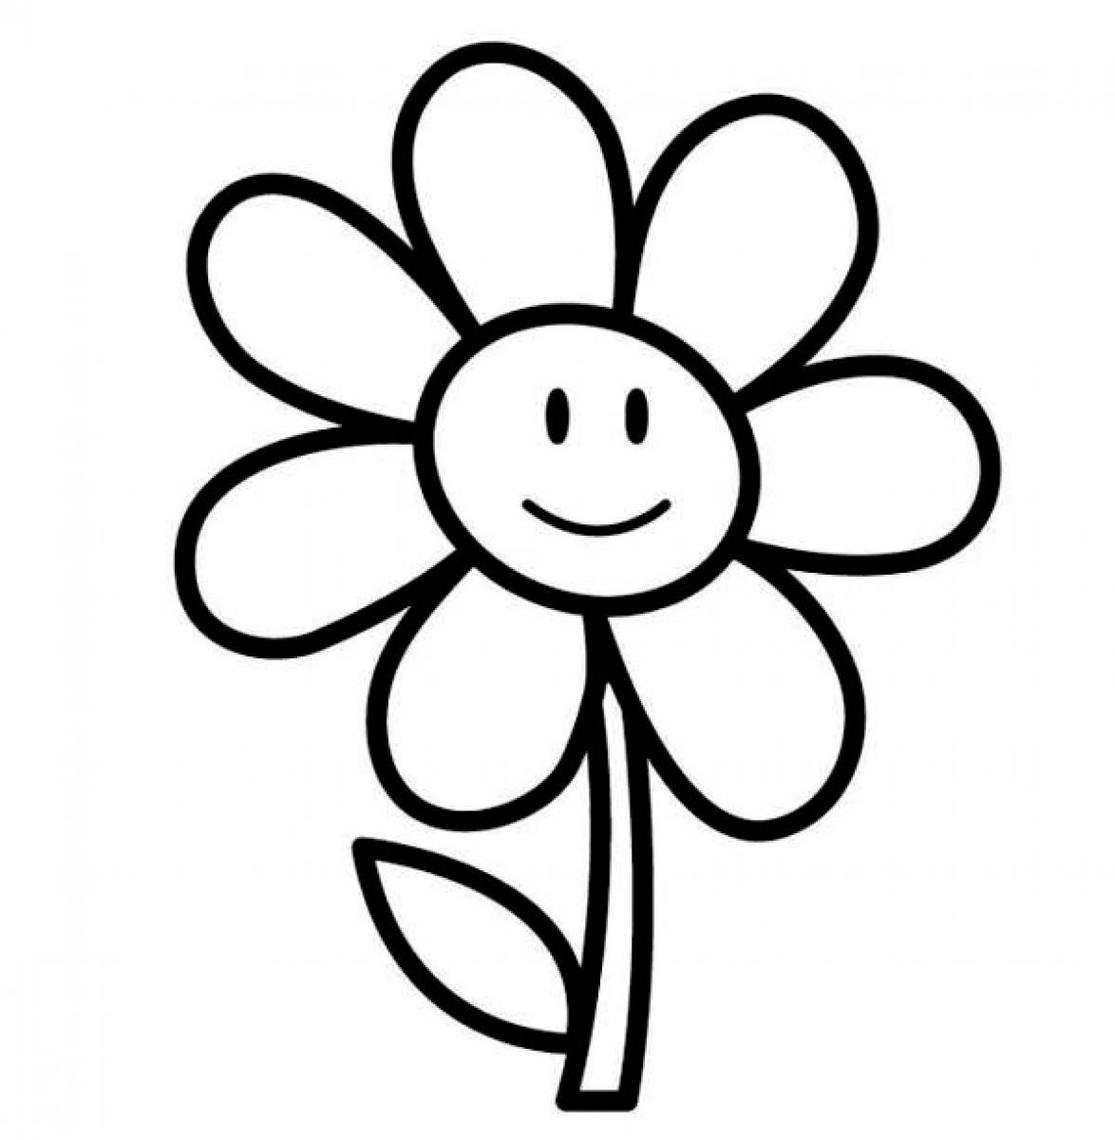 free-flower-clipart-black-and-white-free-download-download-free-flower